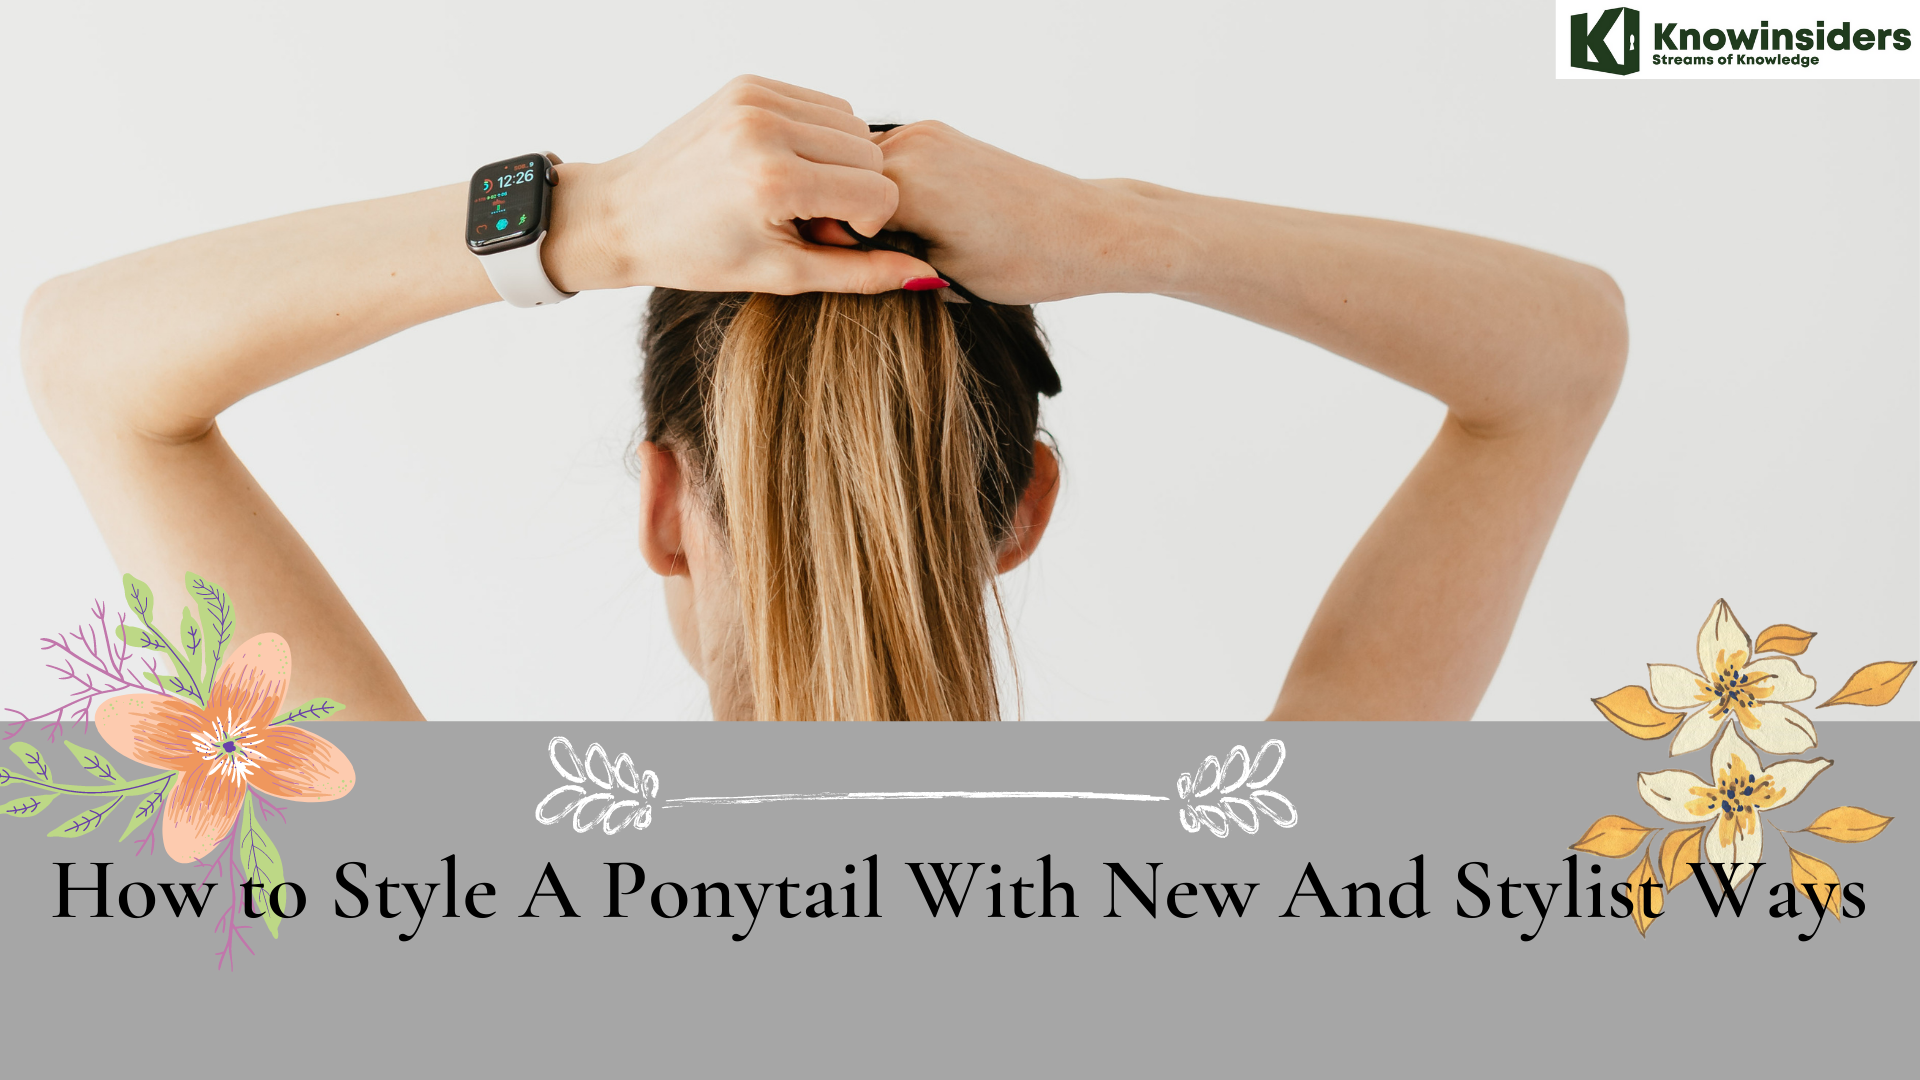 How to Style A Ponytail With New And Stylist Ways